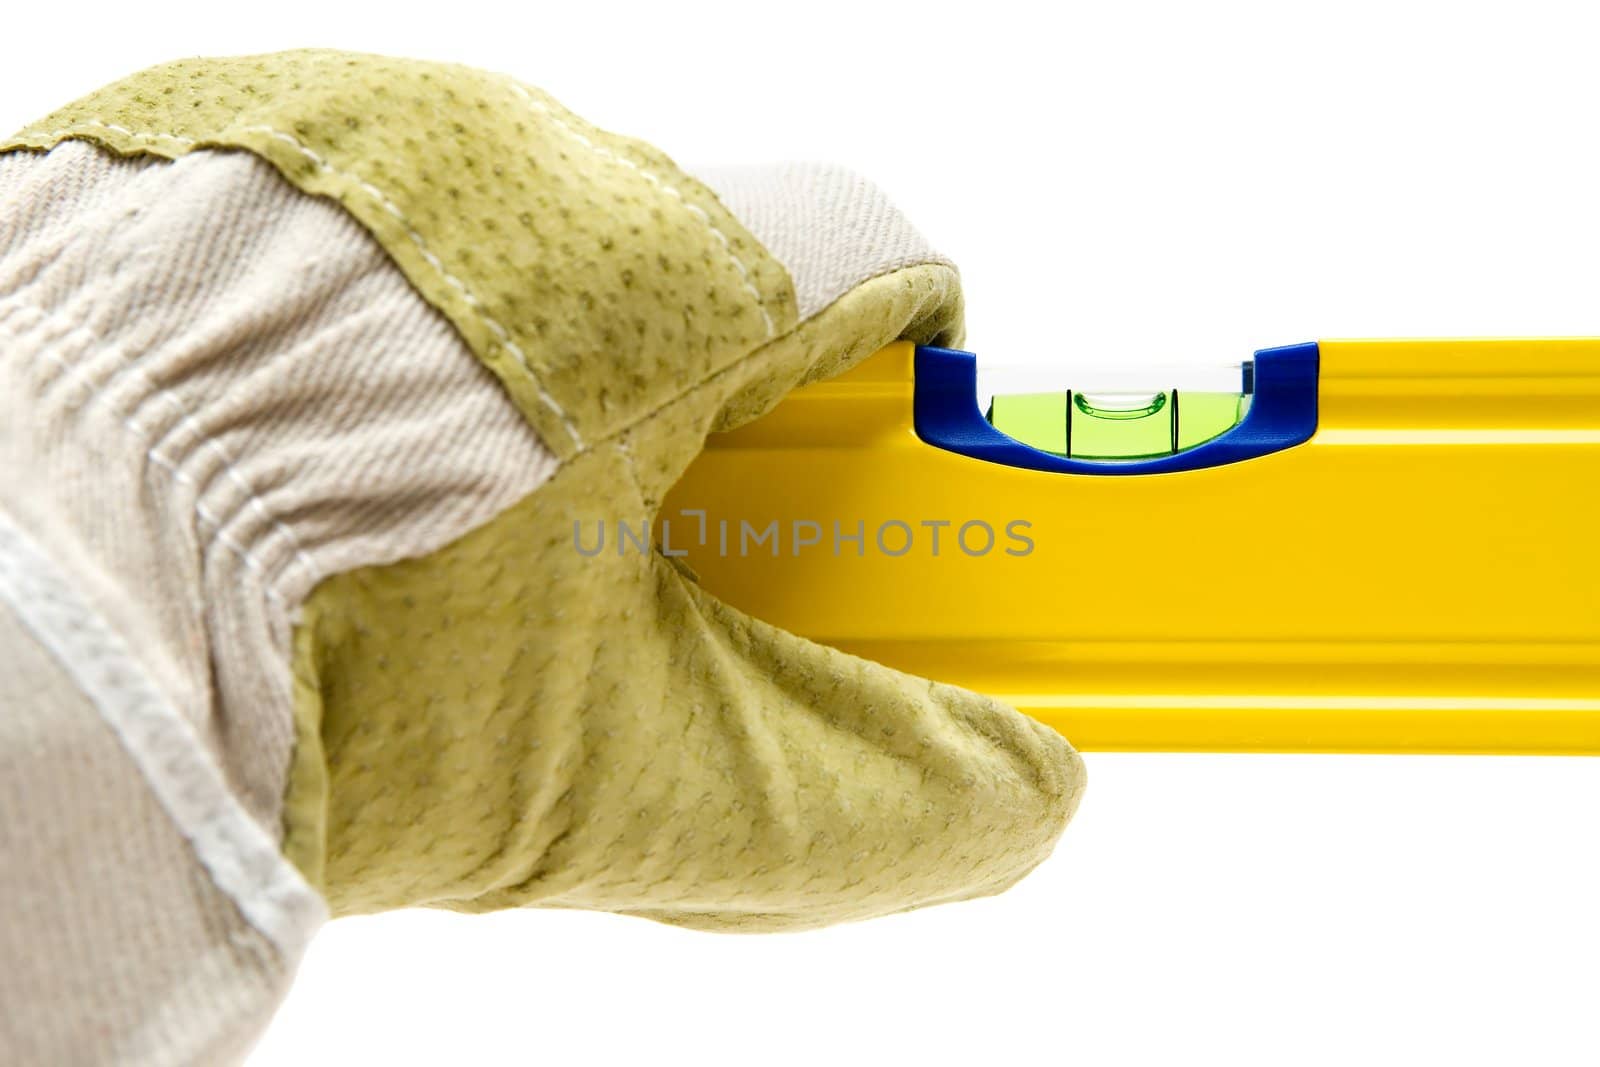 Gloved hand holding a spirit level. Isolated on a white background.